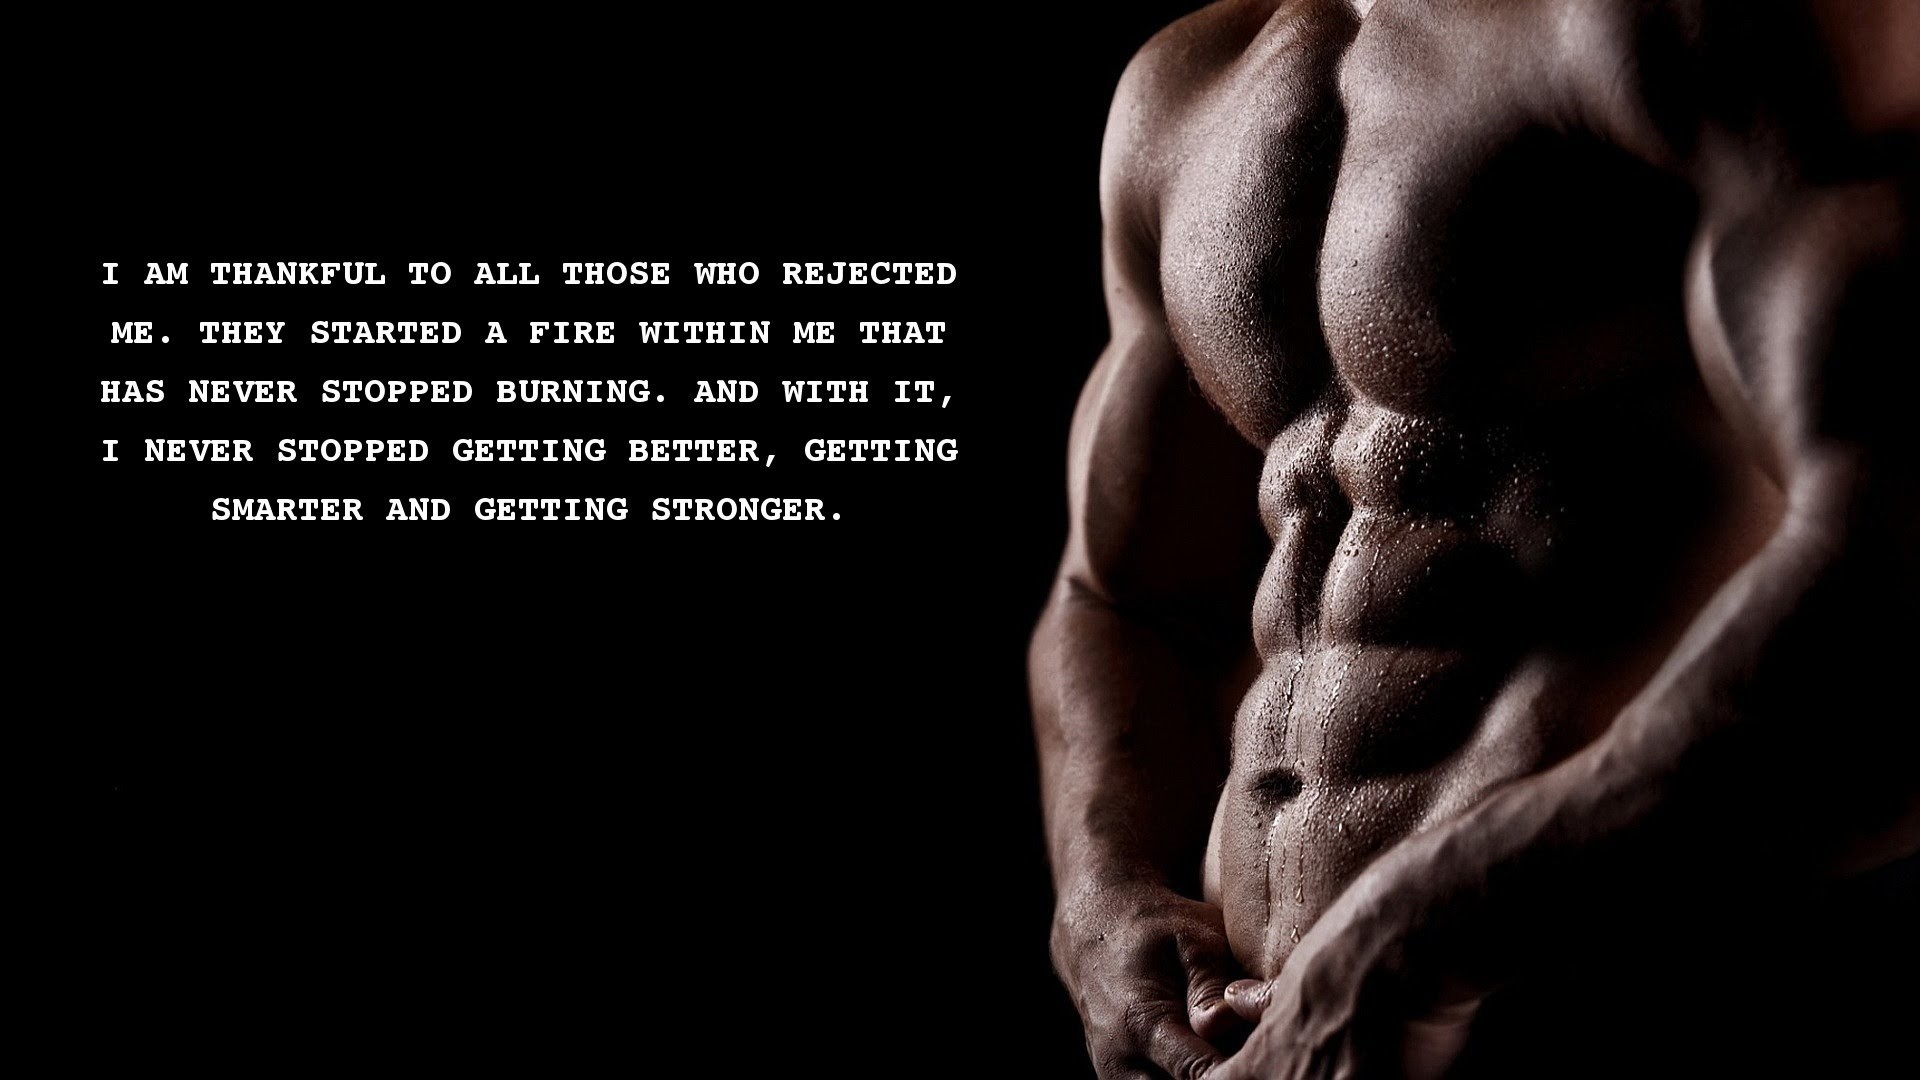 1920x1080 Workout motivational backgrounds download free.